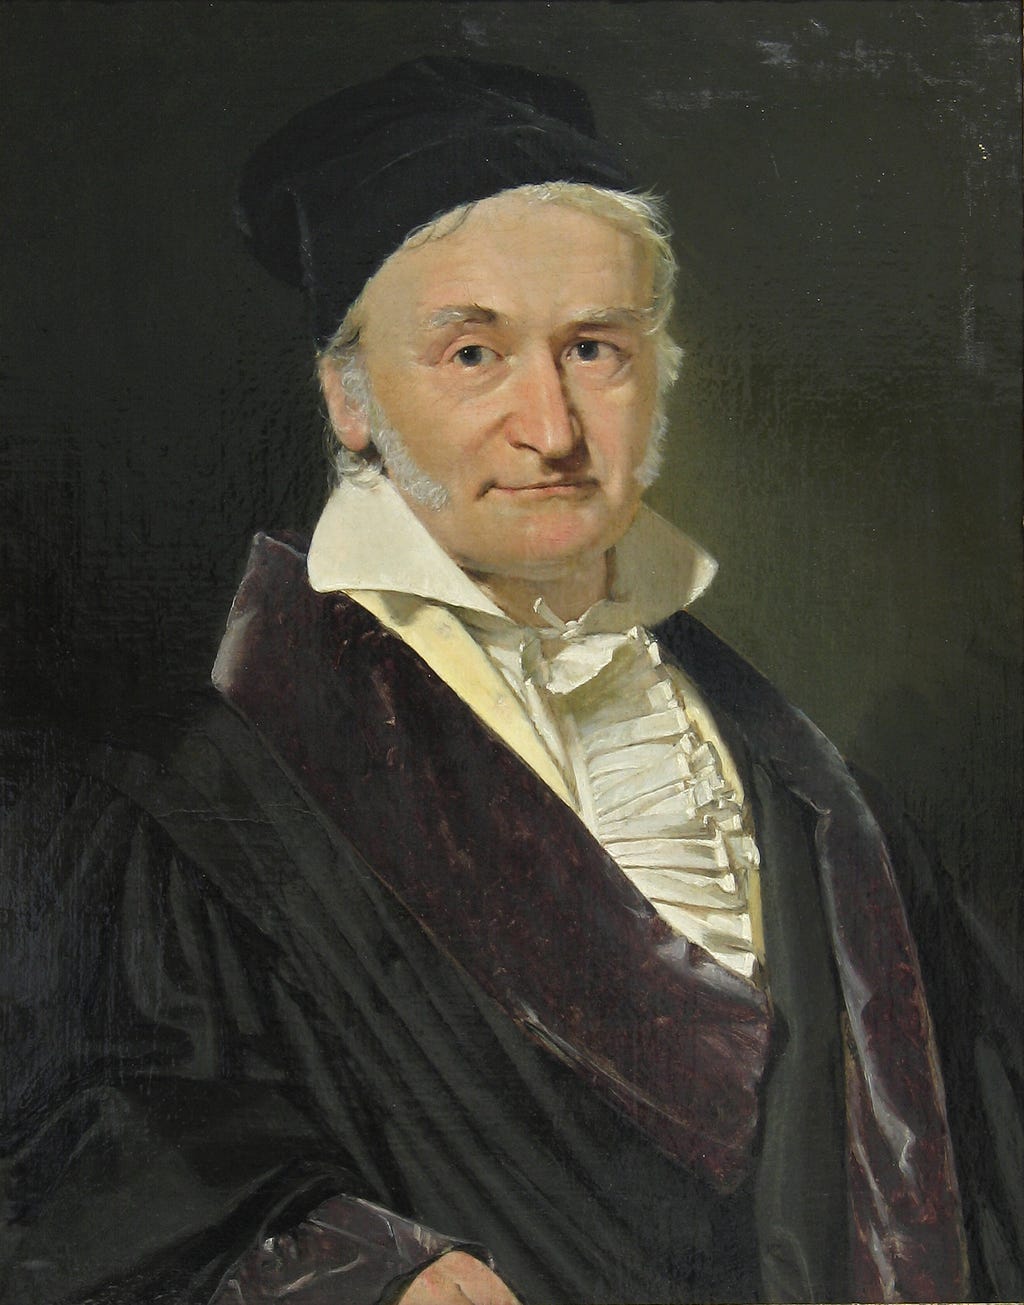 A picture of Fredriech Gauss, the 18th century German mathematician